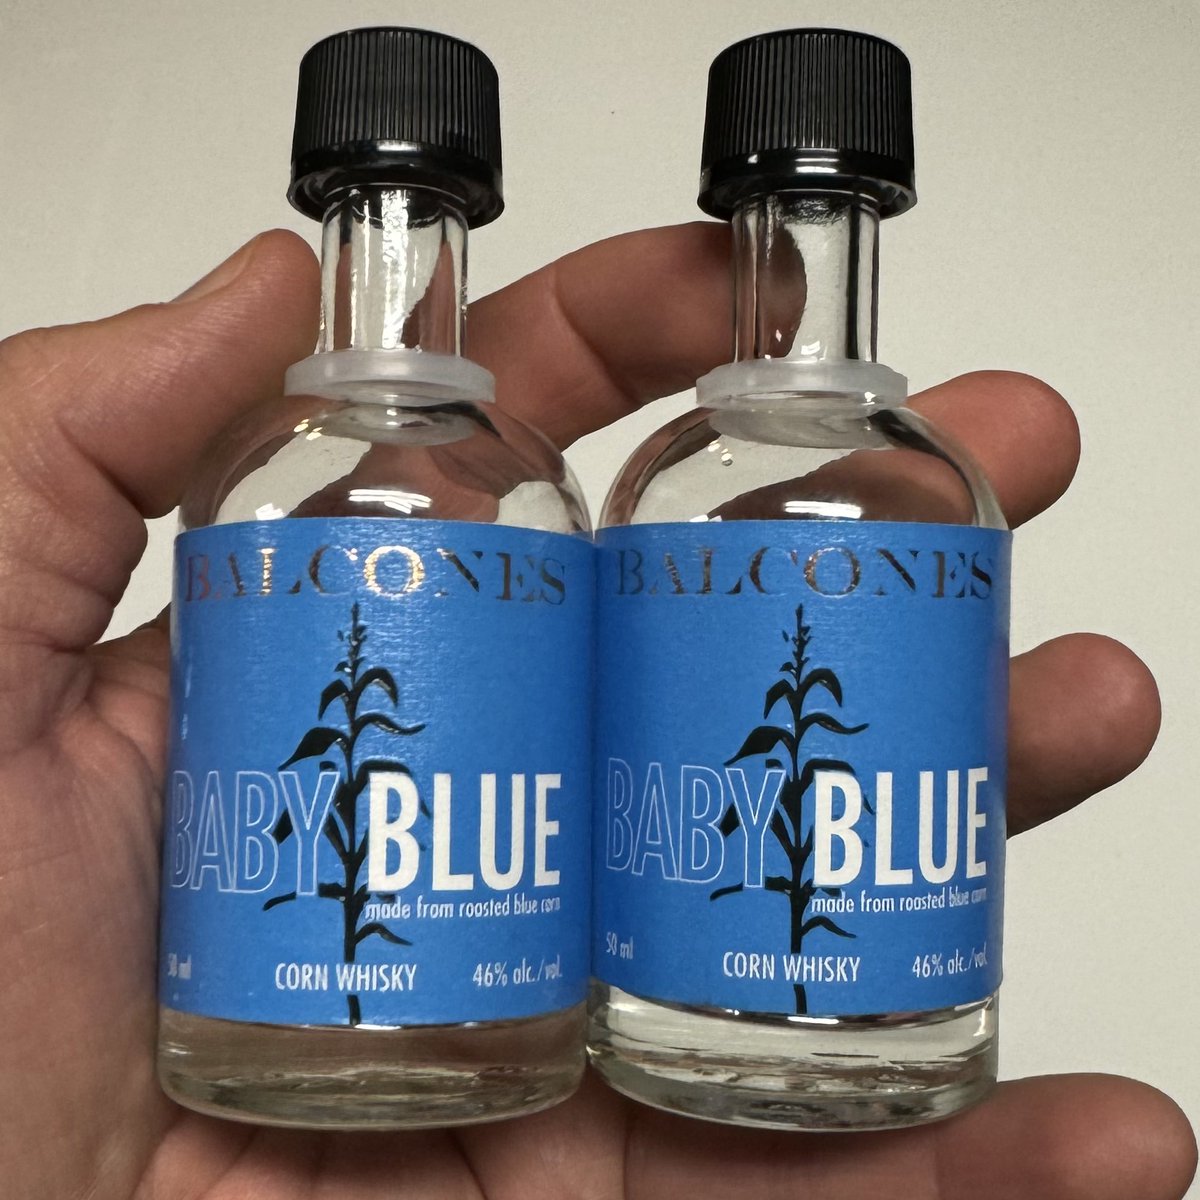 Too lazy to go inside for another pour, so I tapped my garage stash of 50ml bottles of @BalconesWhisky Baby Blue. 
#AlwaysBePrepared